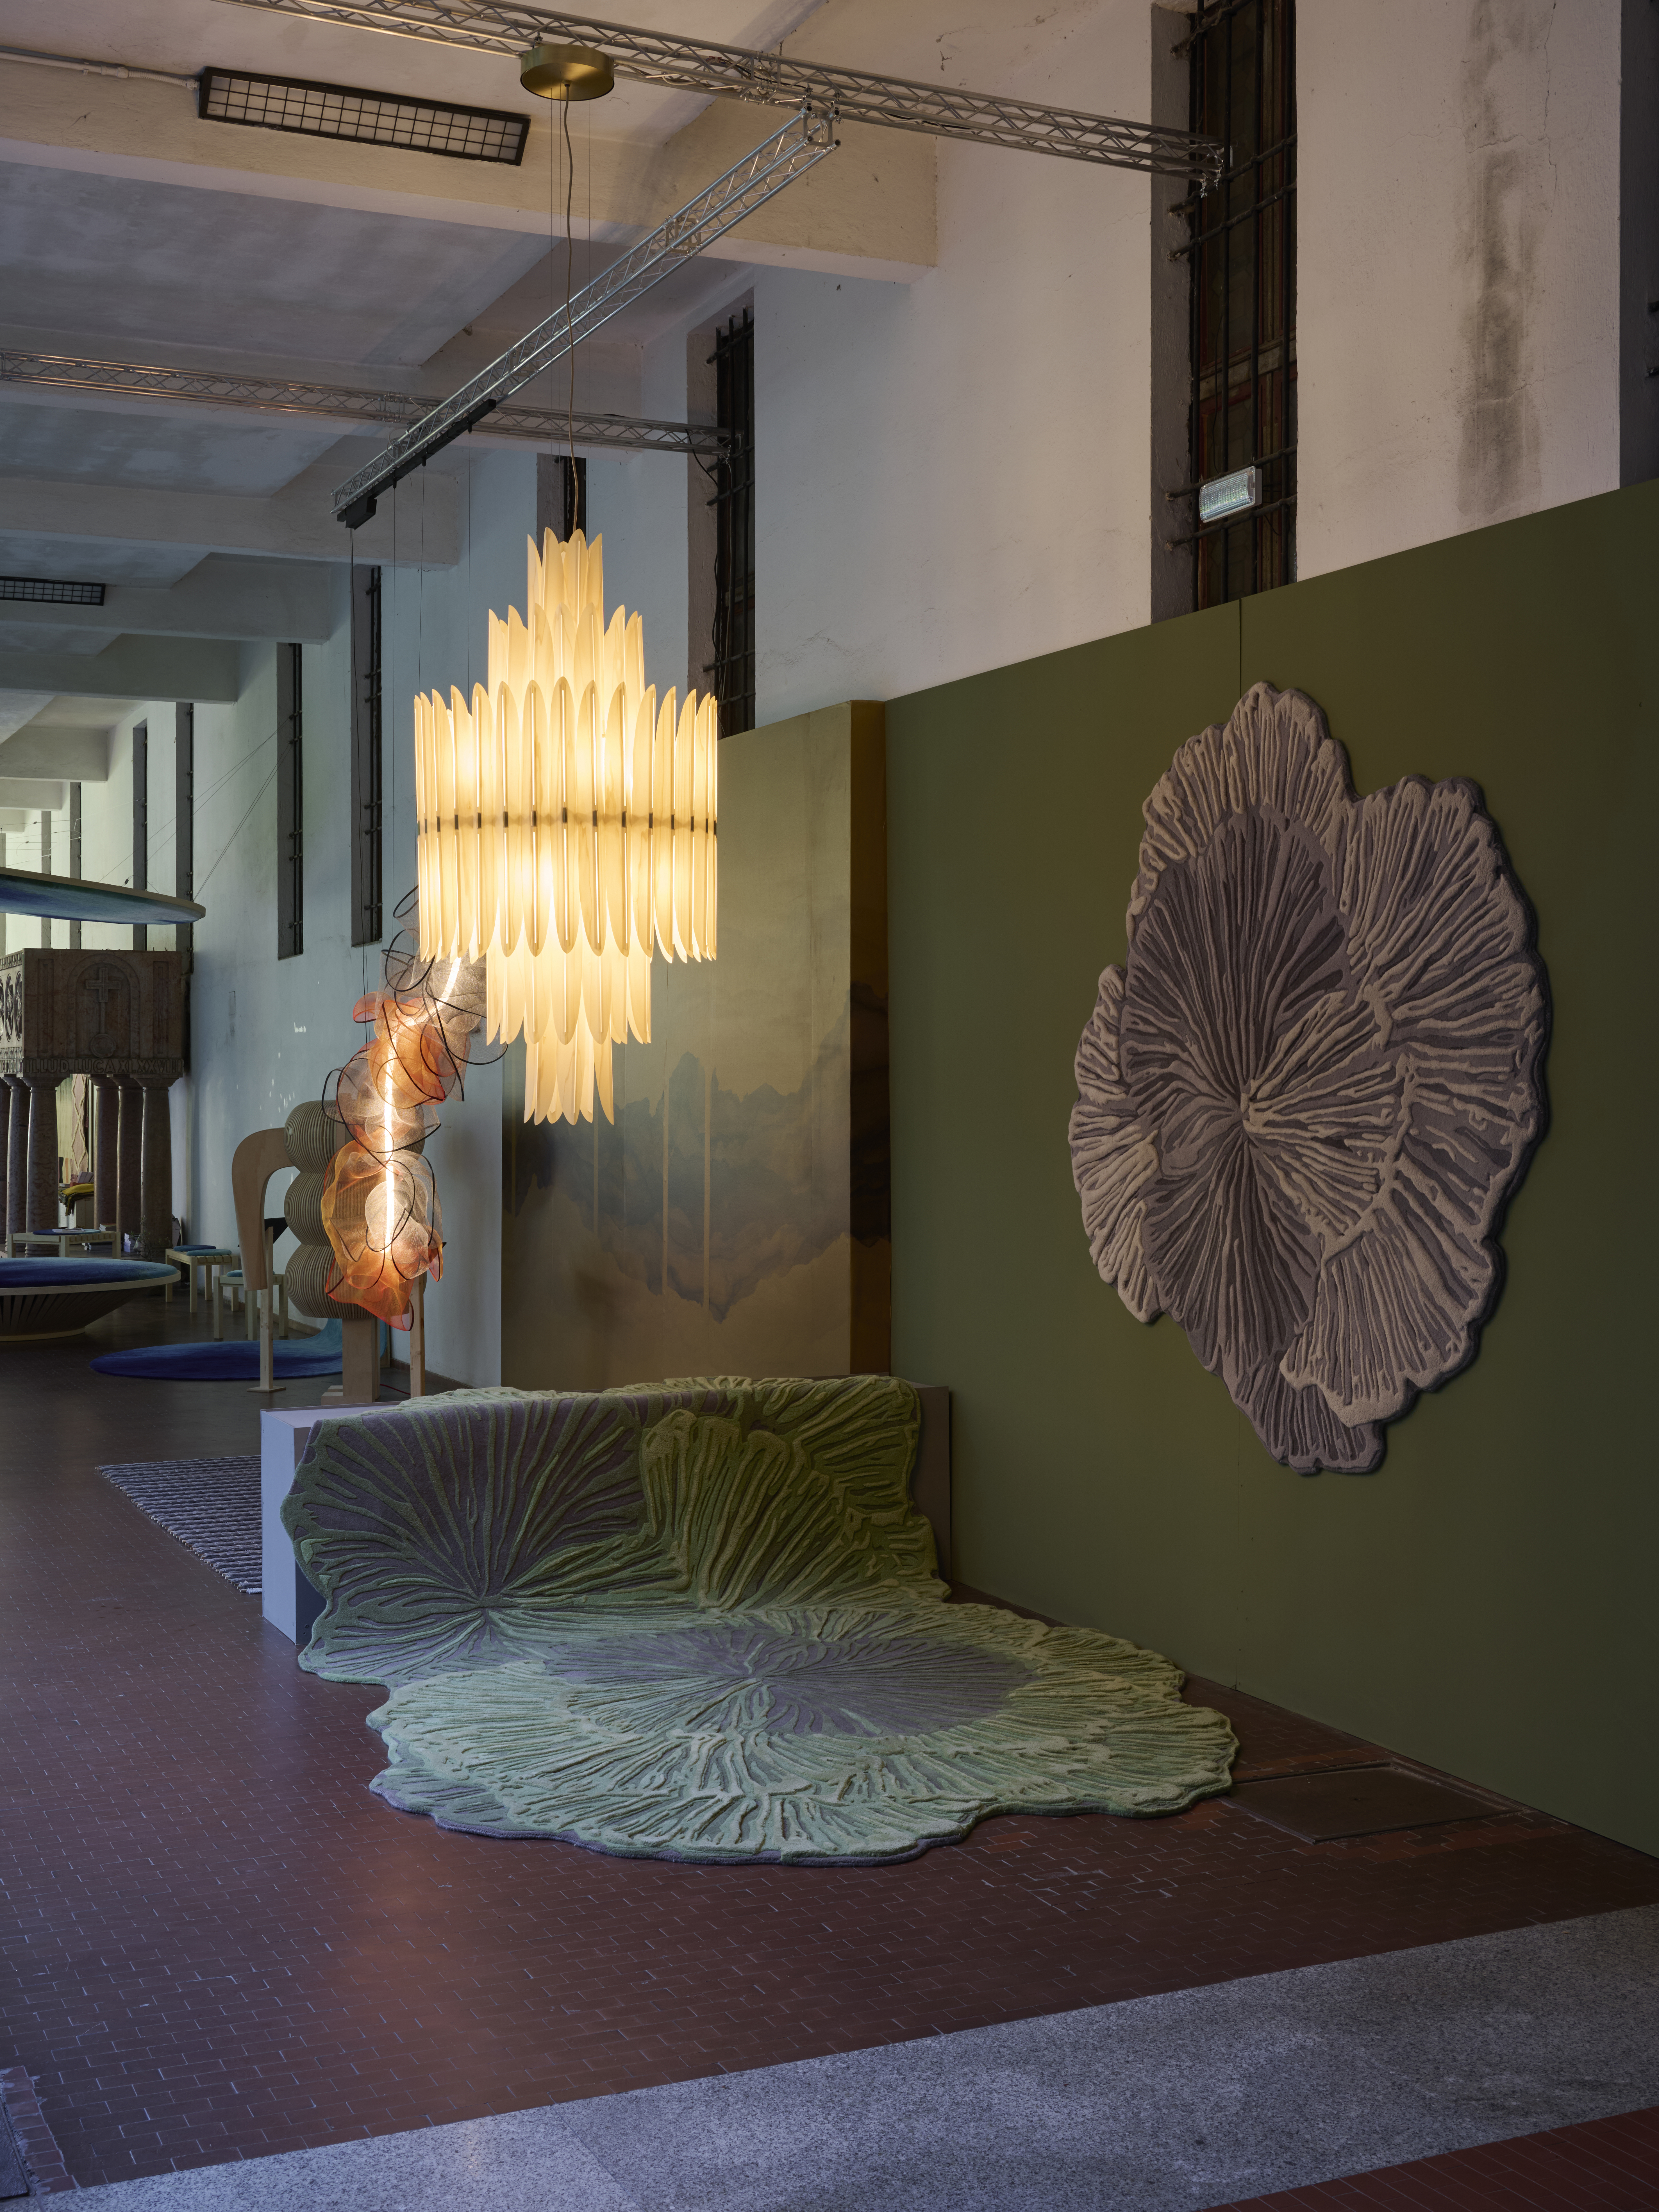 This picture shows the Voliere lamp hanging in front of a mural designed by Bodo Sperlein and above rugs also by the designer for the company Gan Rugs.